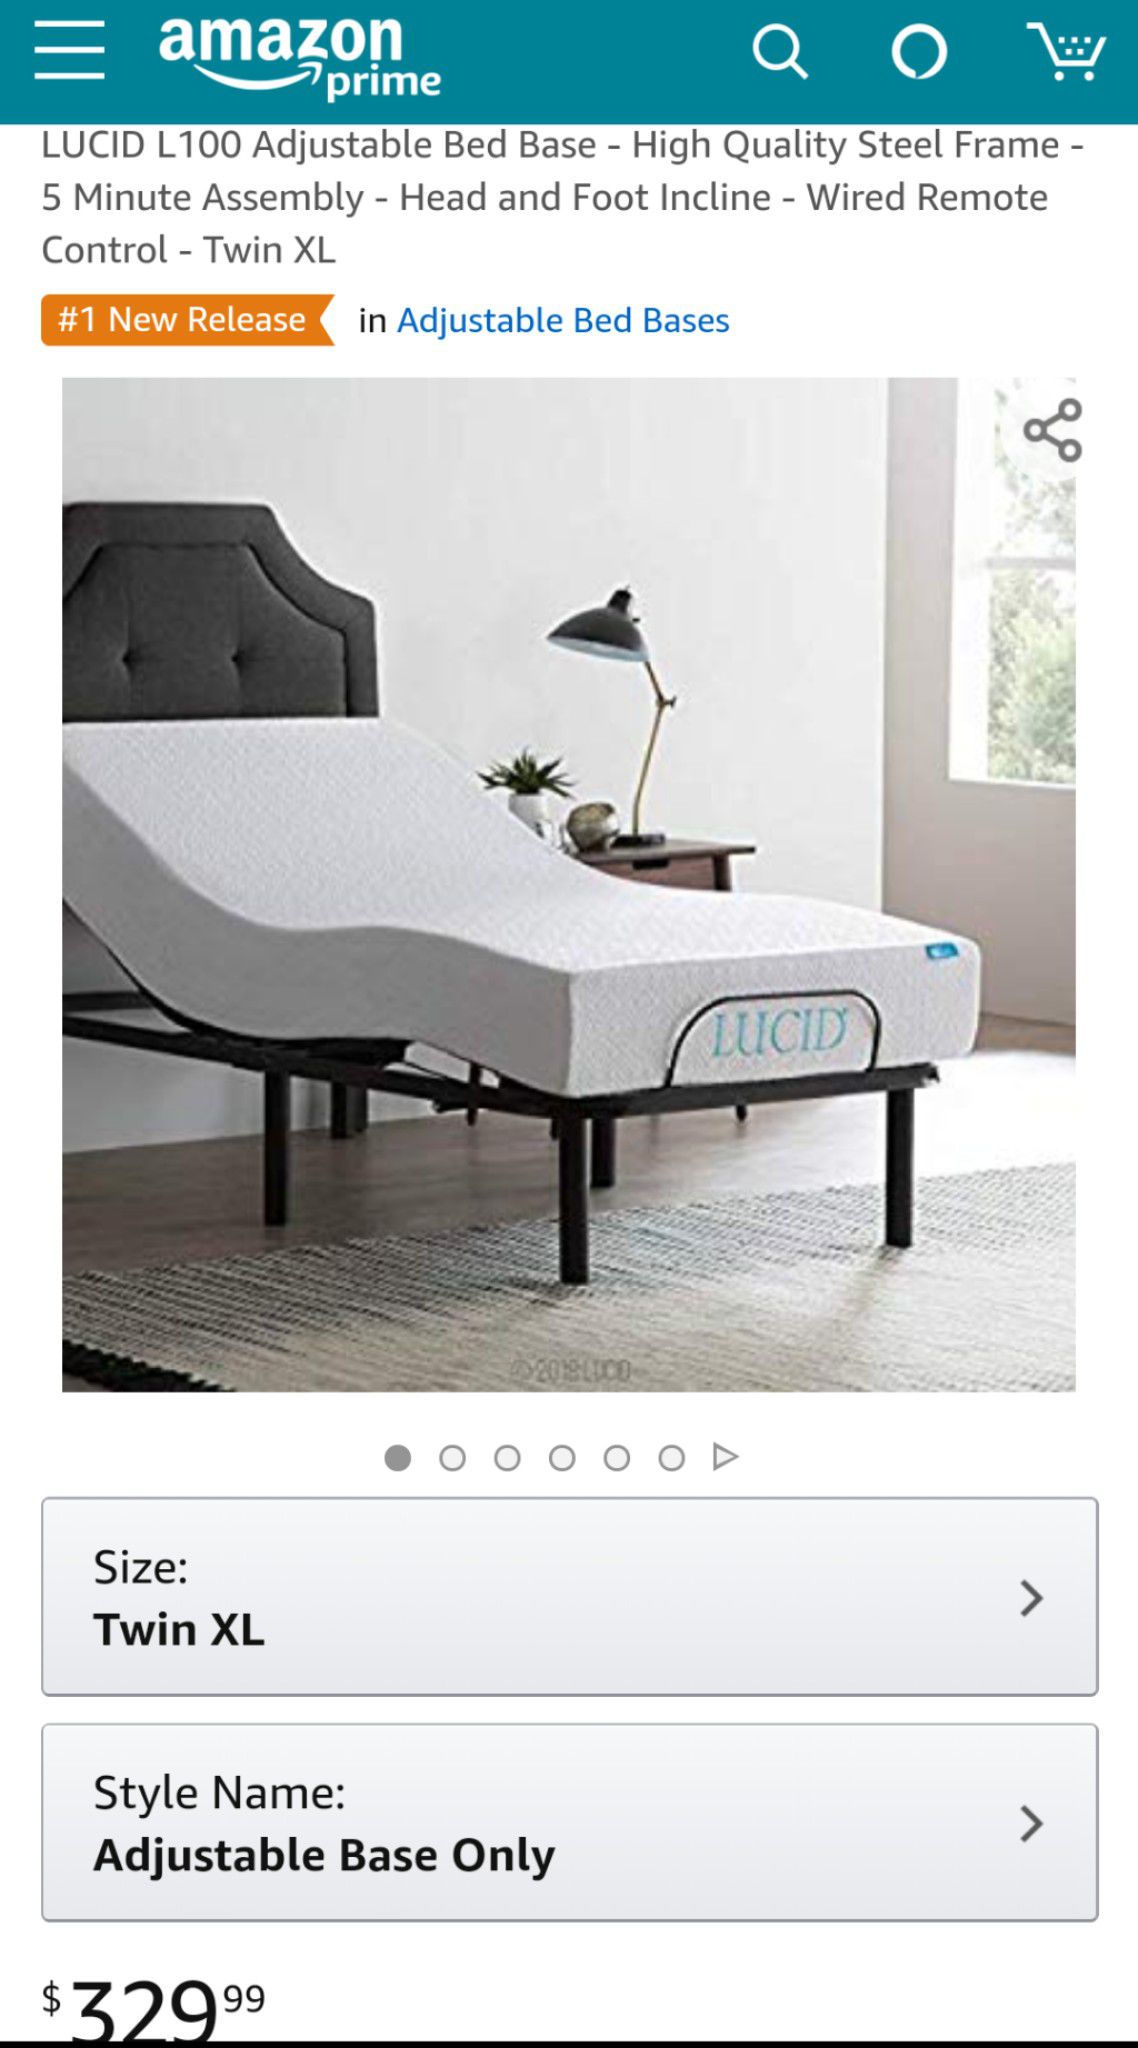 Twin XL adjustable bed base brand new